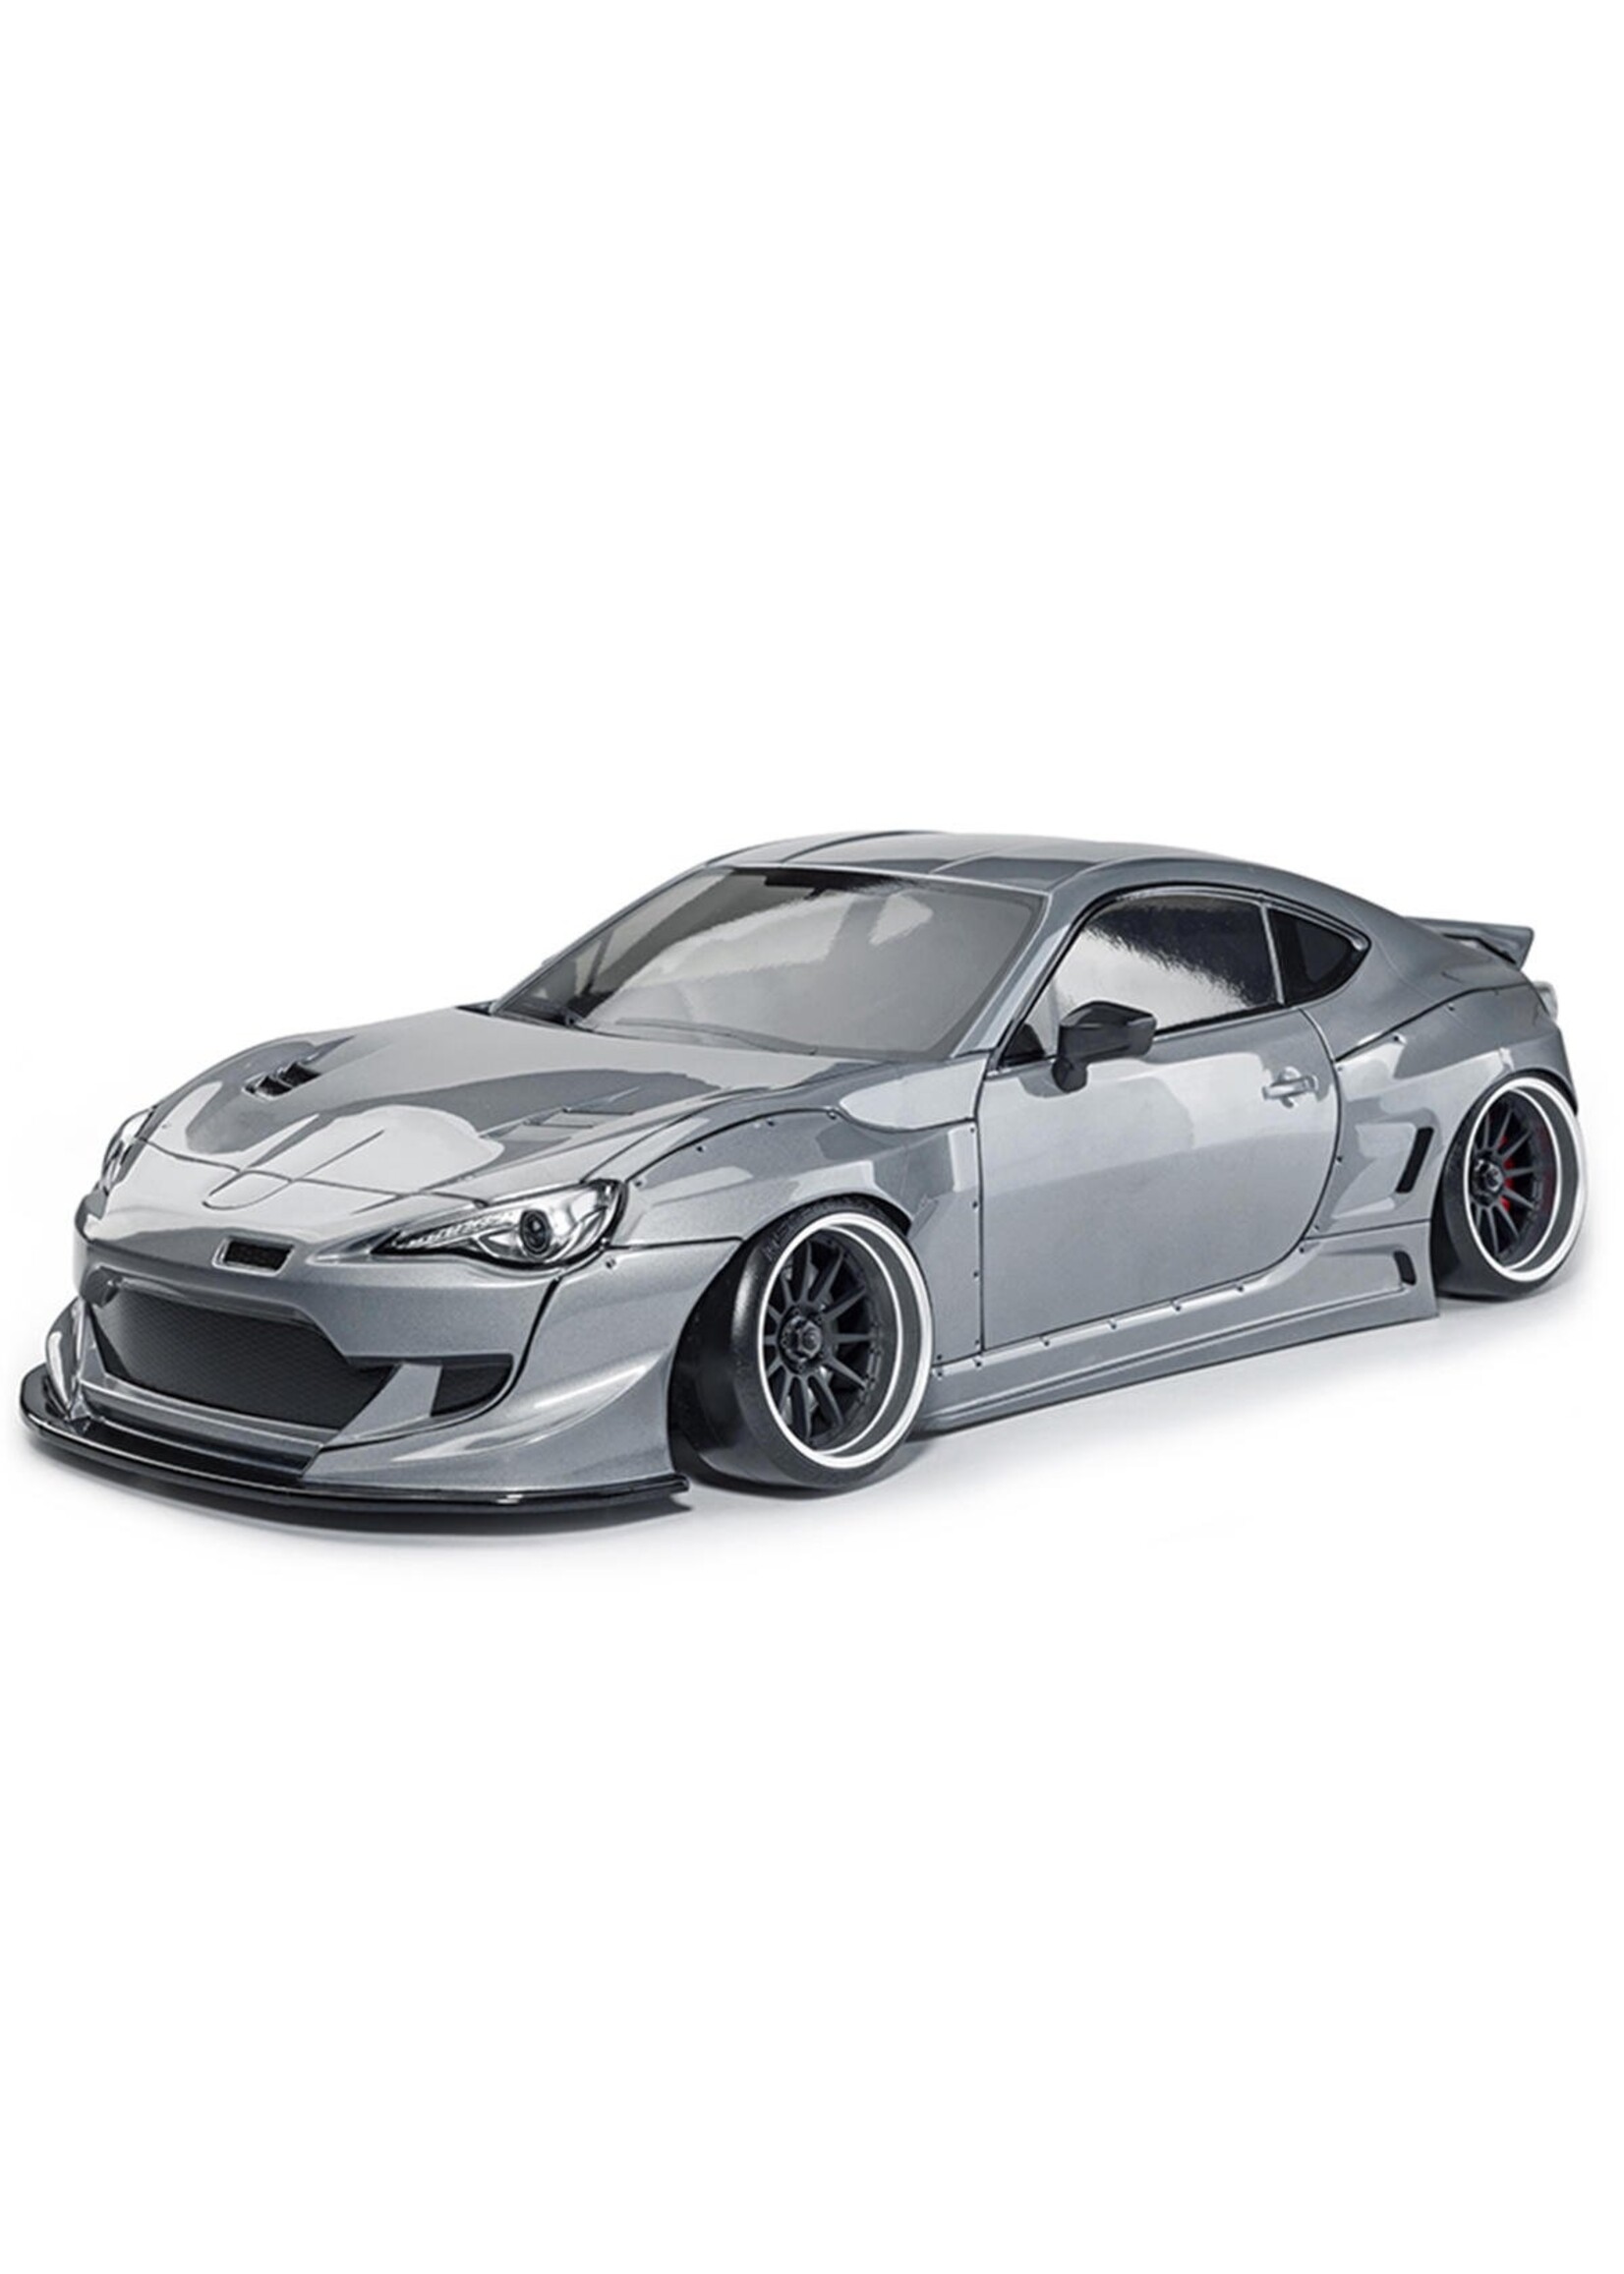 MST 1/10 RMX 2.5 2WD Brushless Drift Car With 86RB Body, RTR - Metal Grey